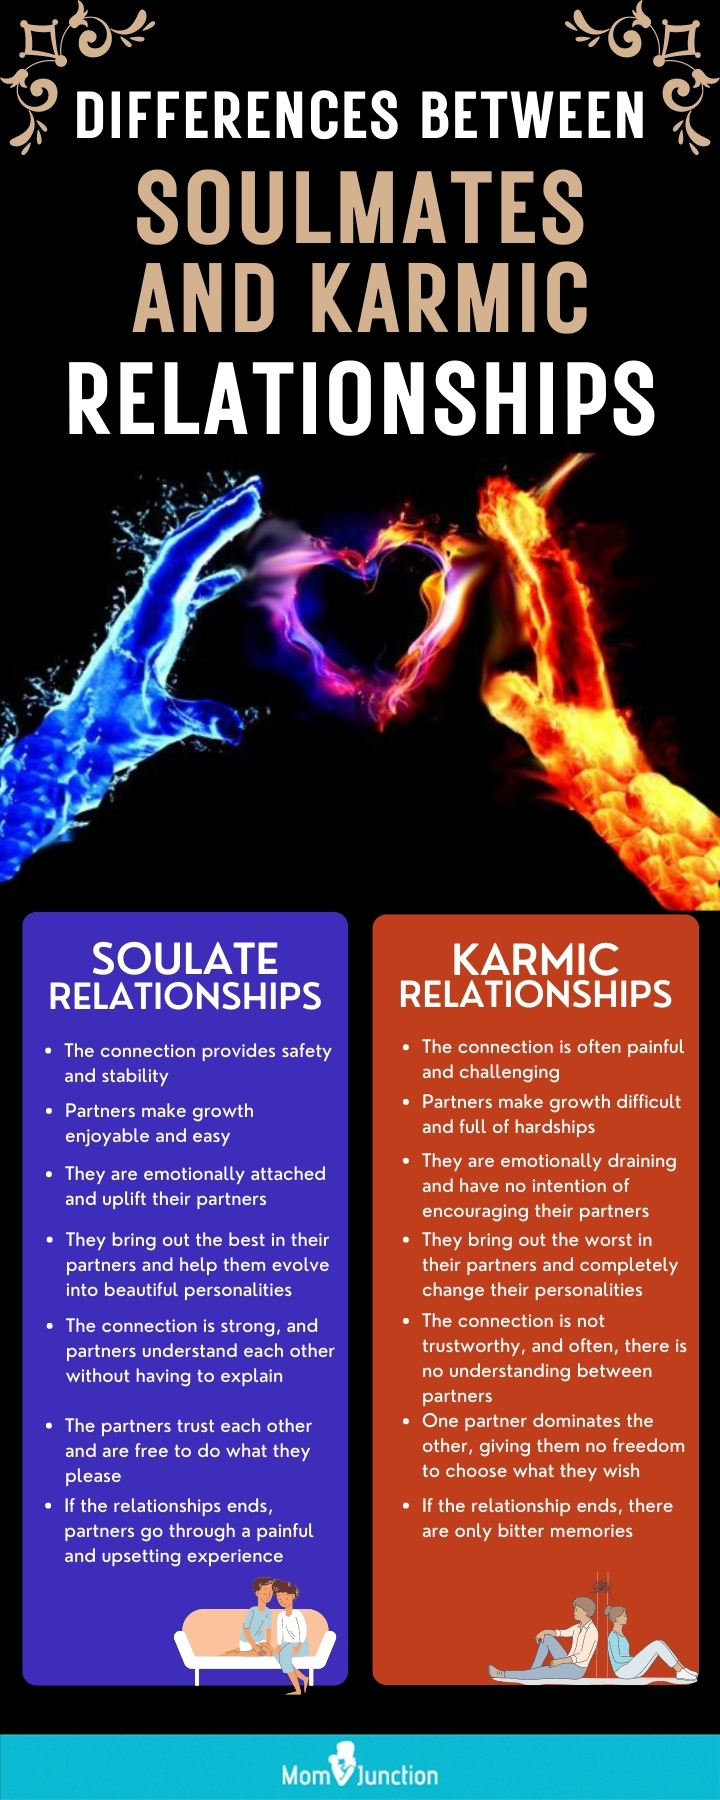 Differences between soulmates and karmic relationship (infographic)